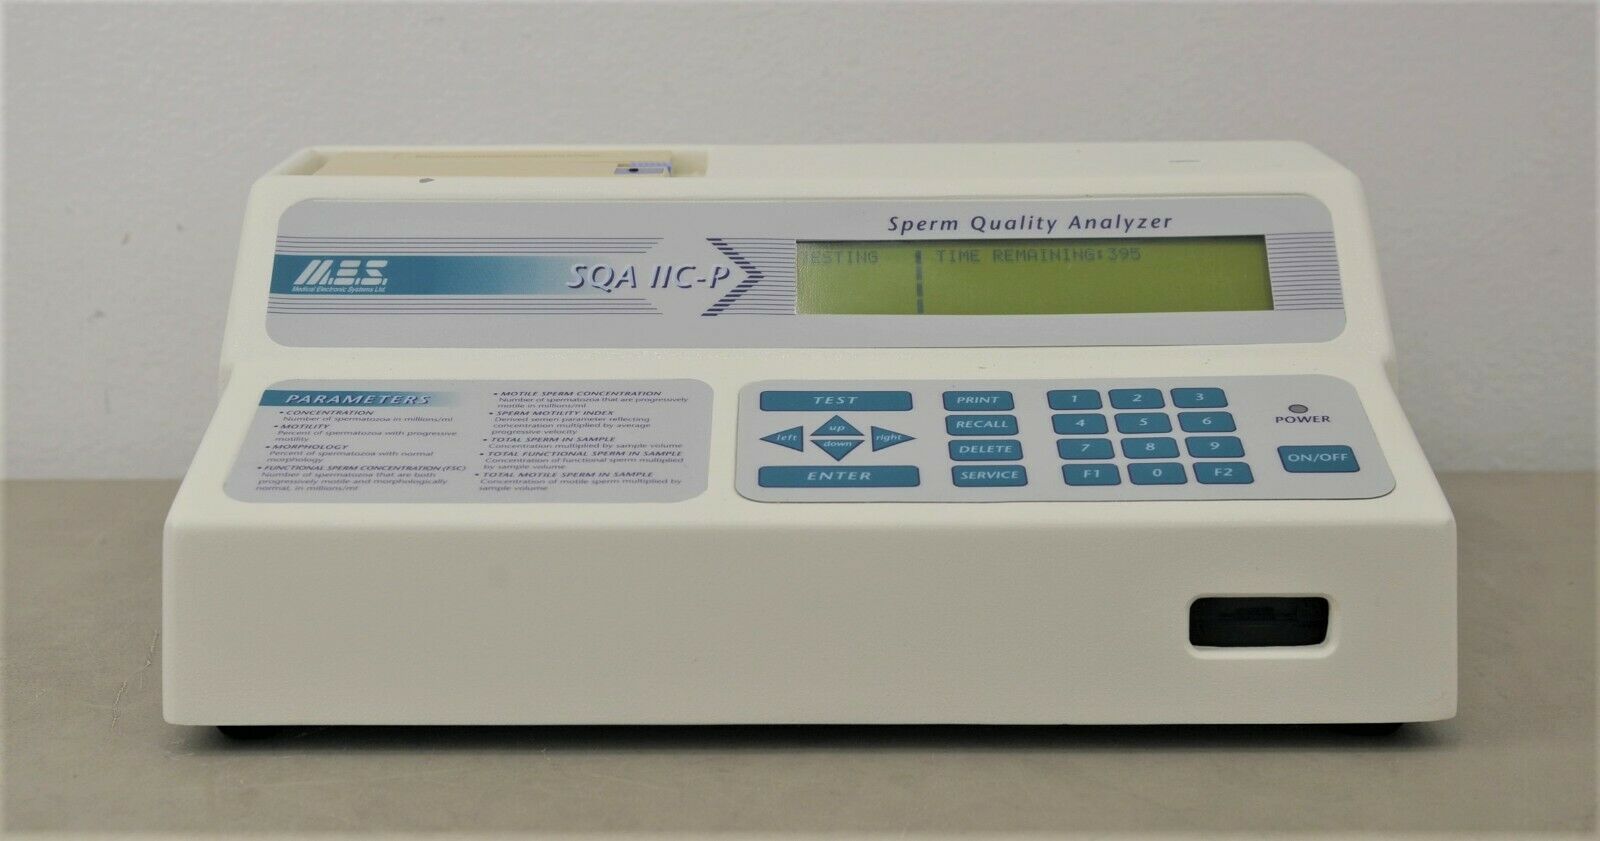 https://www.rhinotradellc.com/wp-content/uploads/imported/0/MES-Medical-Electronic-Systems-SQA-IIC-P-Sperm-Quality-Analyzer-21522-D12-264859894260-5.JPG